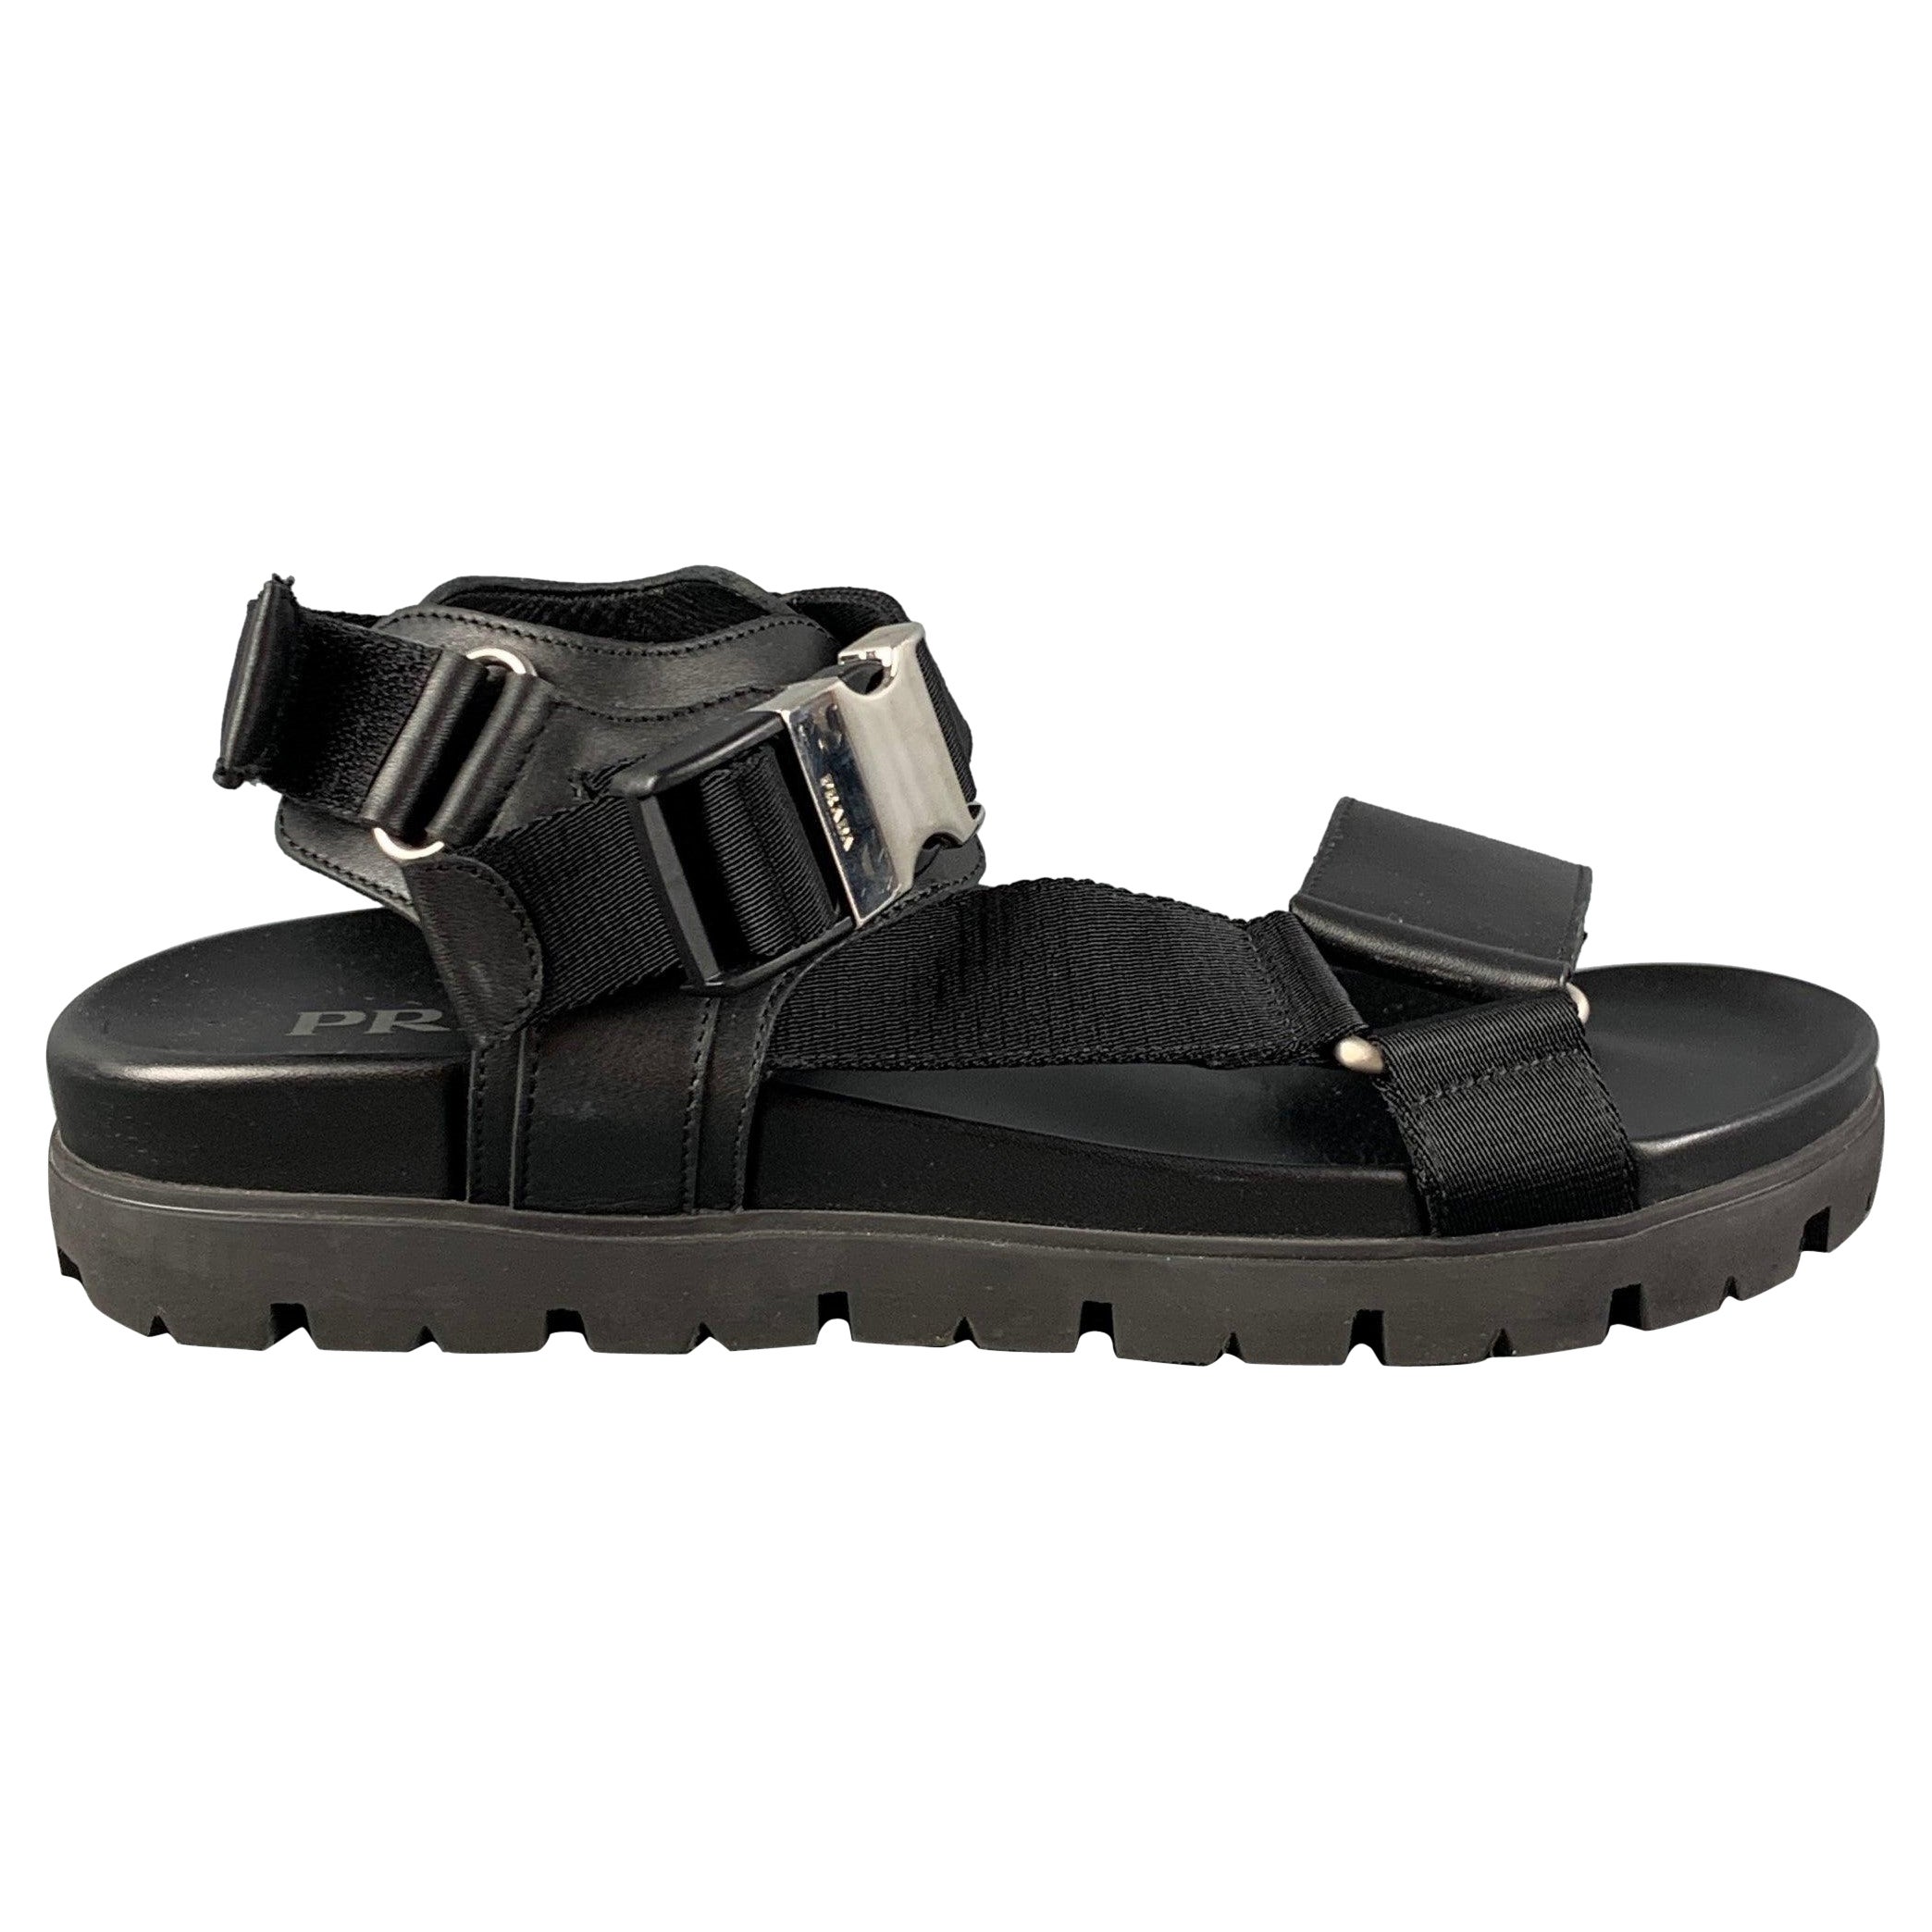 PRADA Size 8 Black Leather Belted Buckle Sandals For Sale